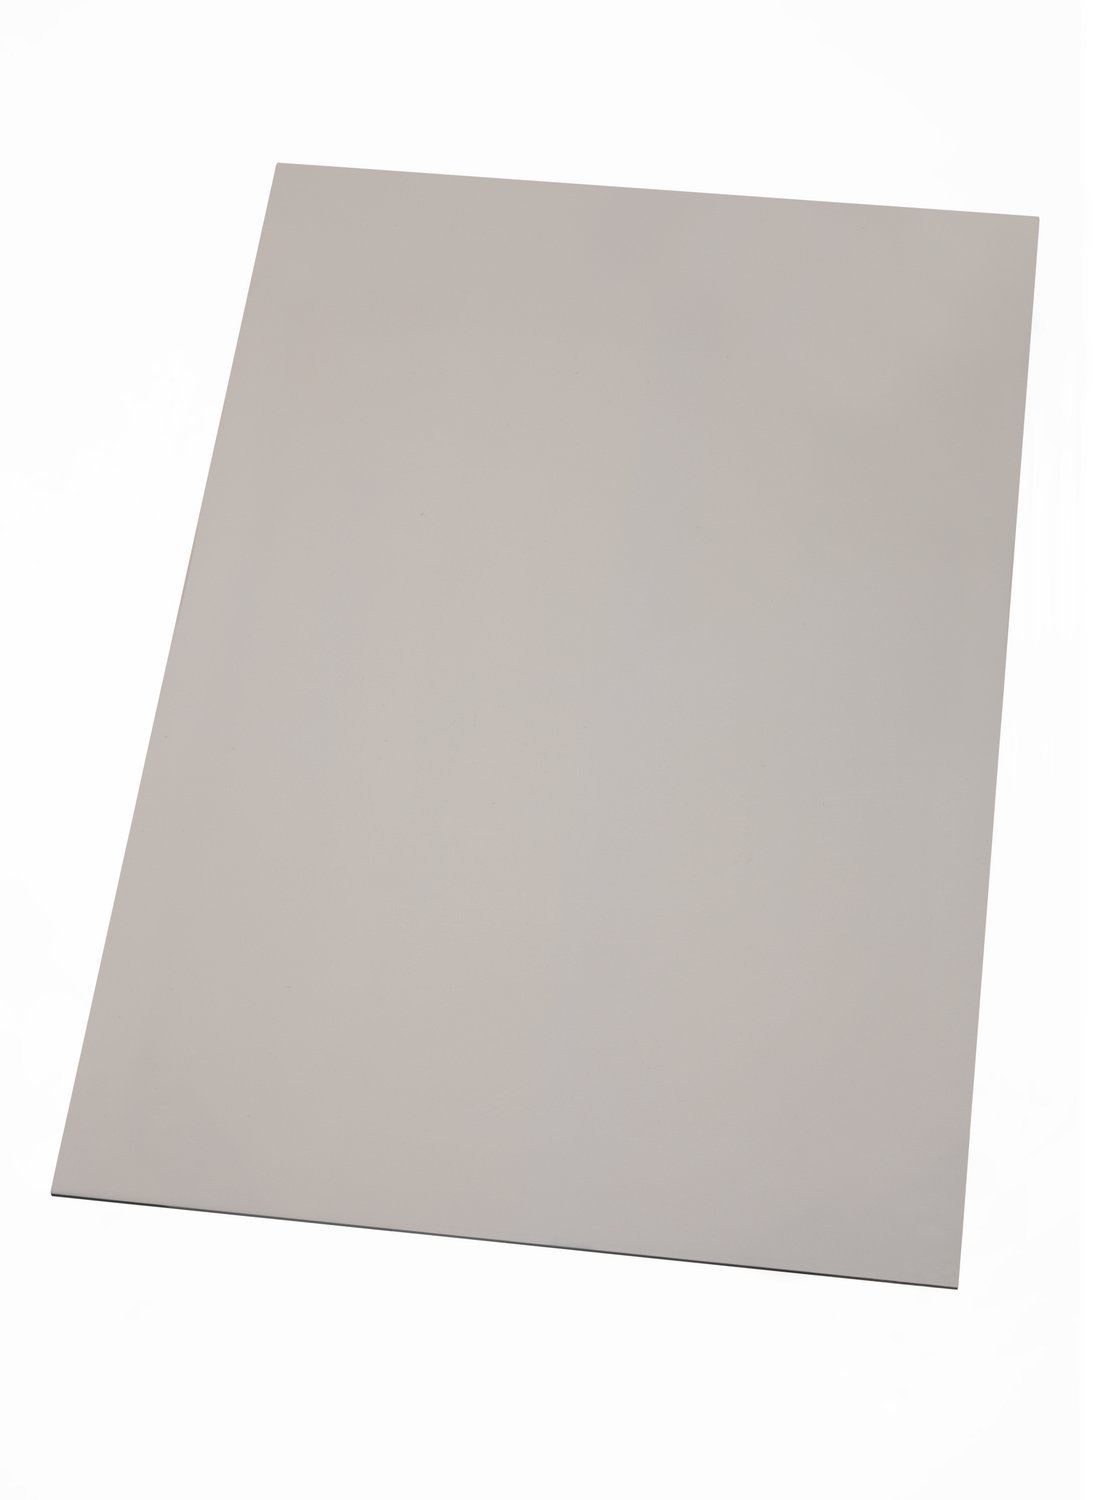 7010405196 - 3M Thermally Conductive Acrylic Interface Pad 5571-075, 300 mm x 30 m x
0.75 mm, 1/Case